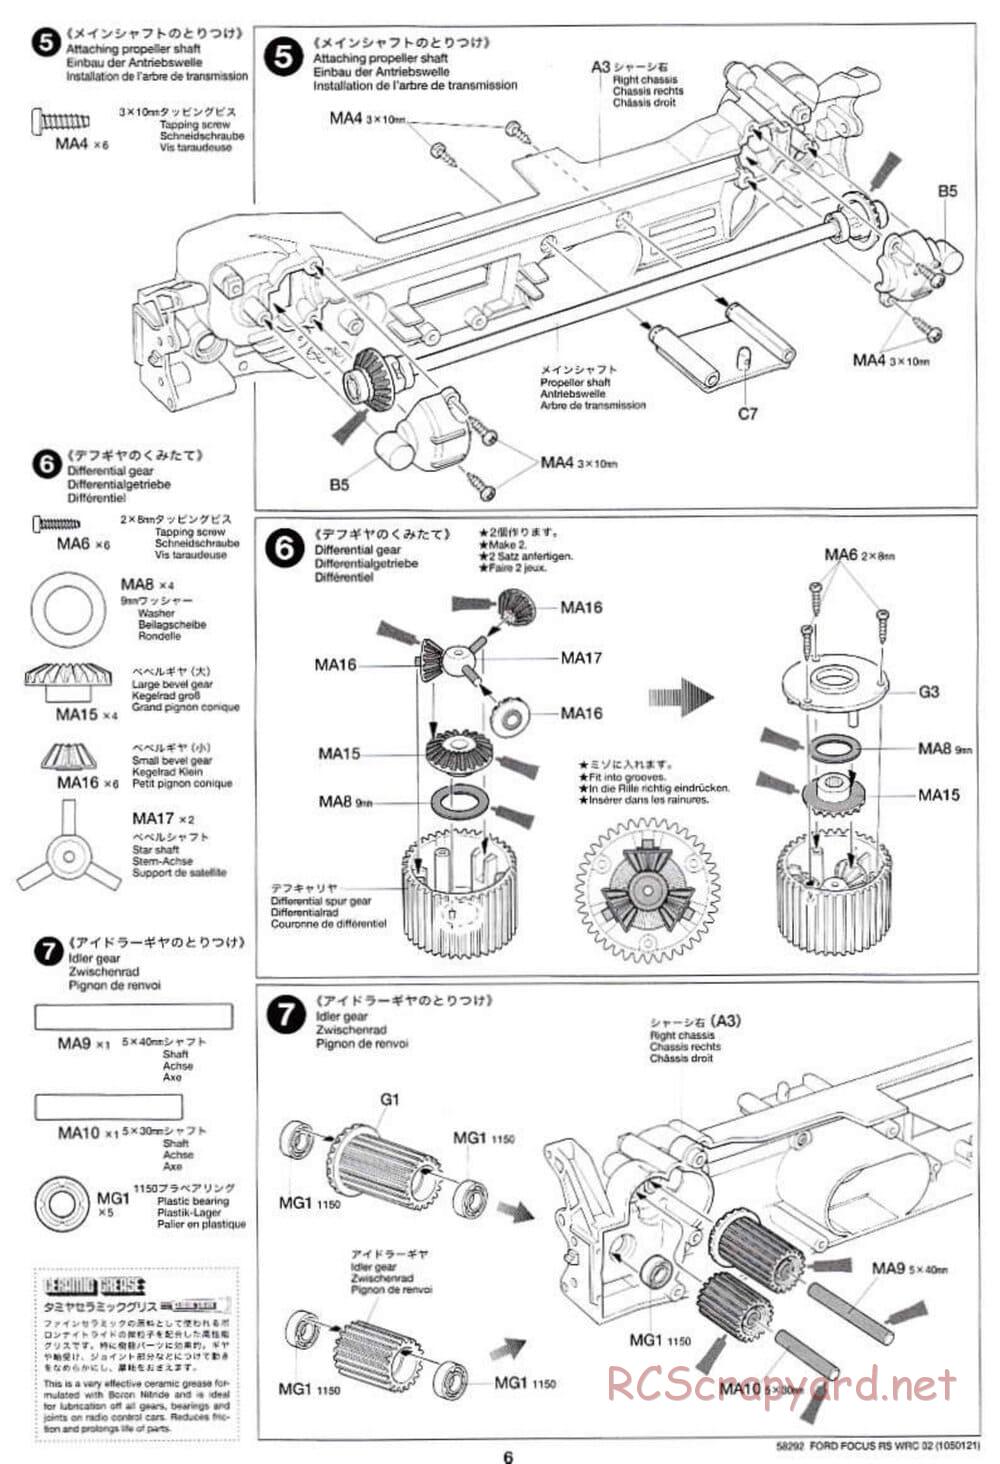 Tamiya - Ford Focus RS WRC 02 - TL-01 Chassis - Manual - Page 6